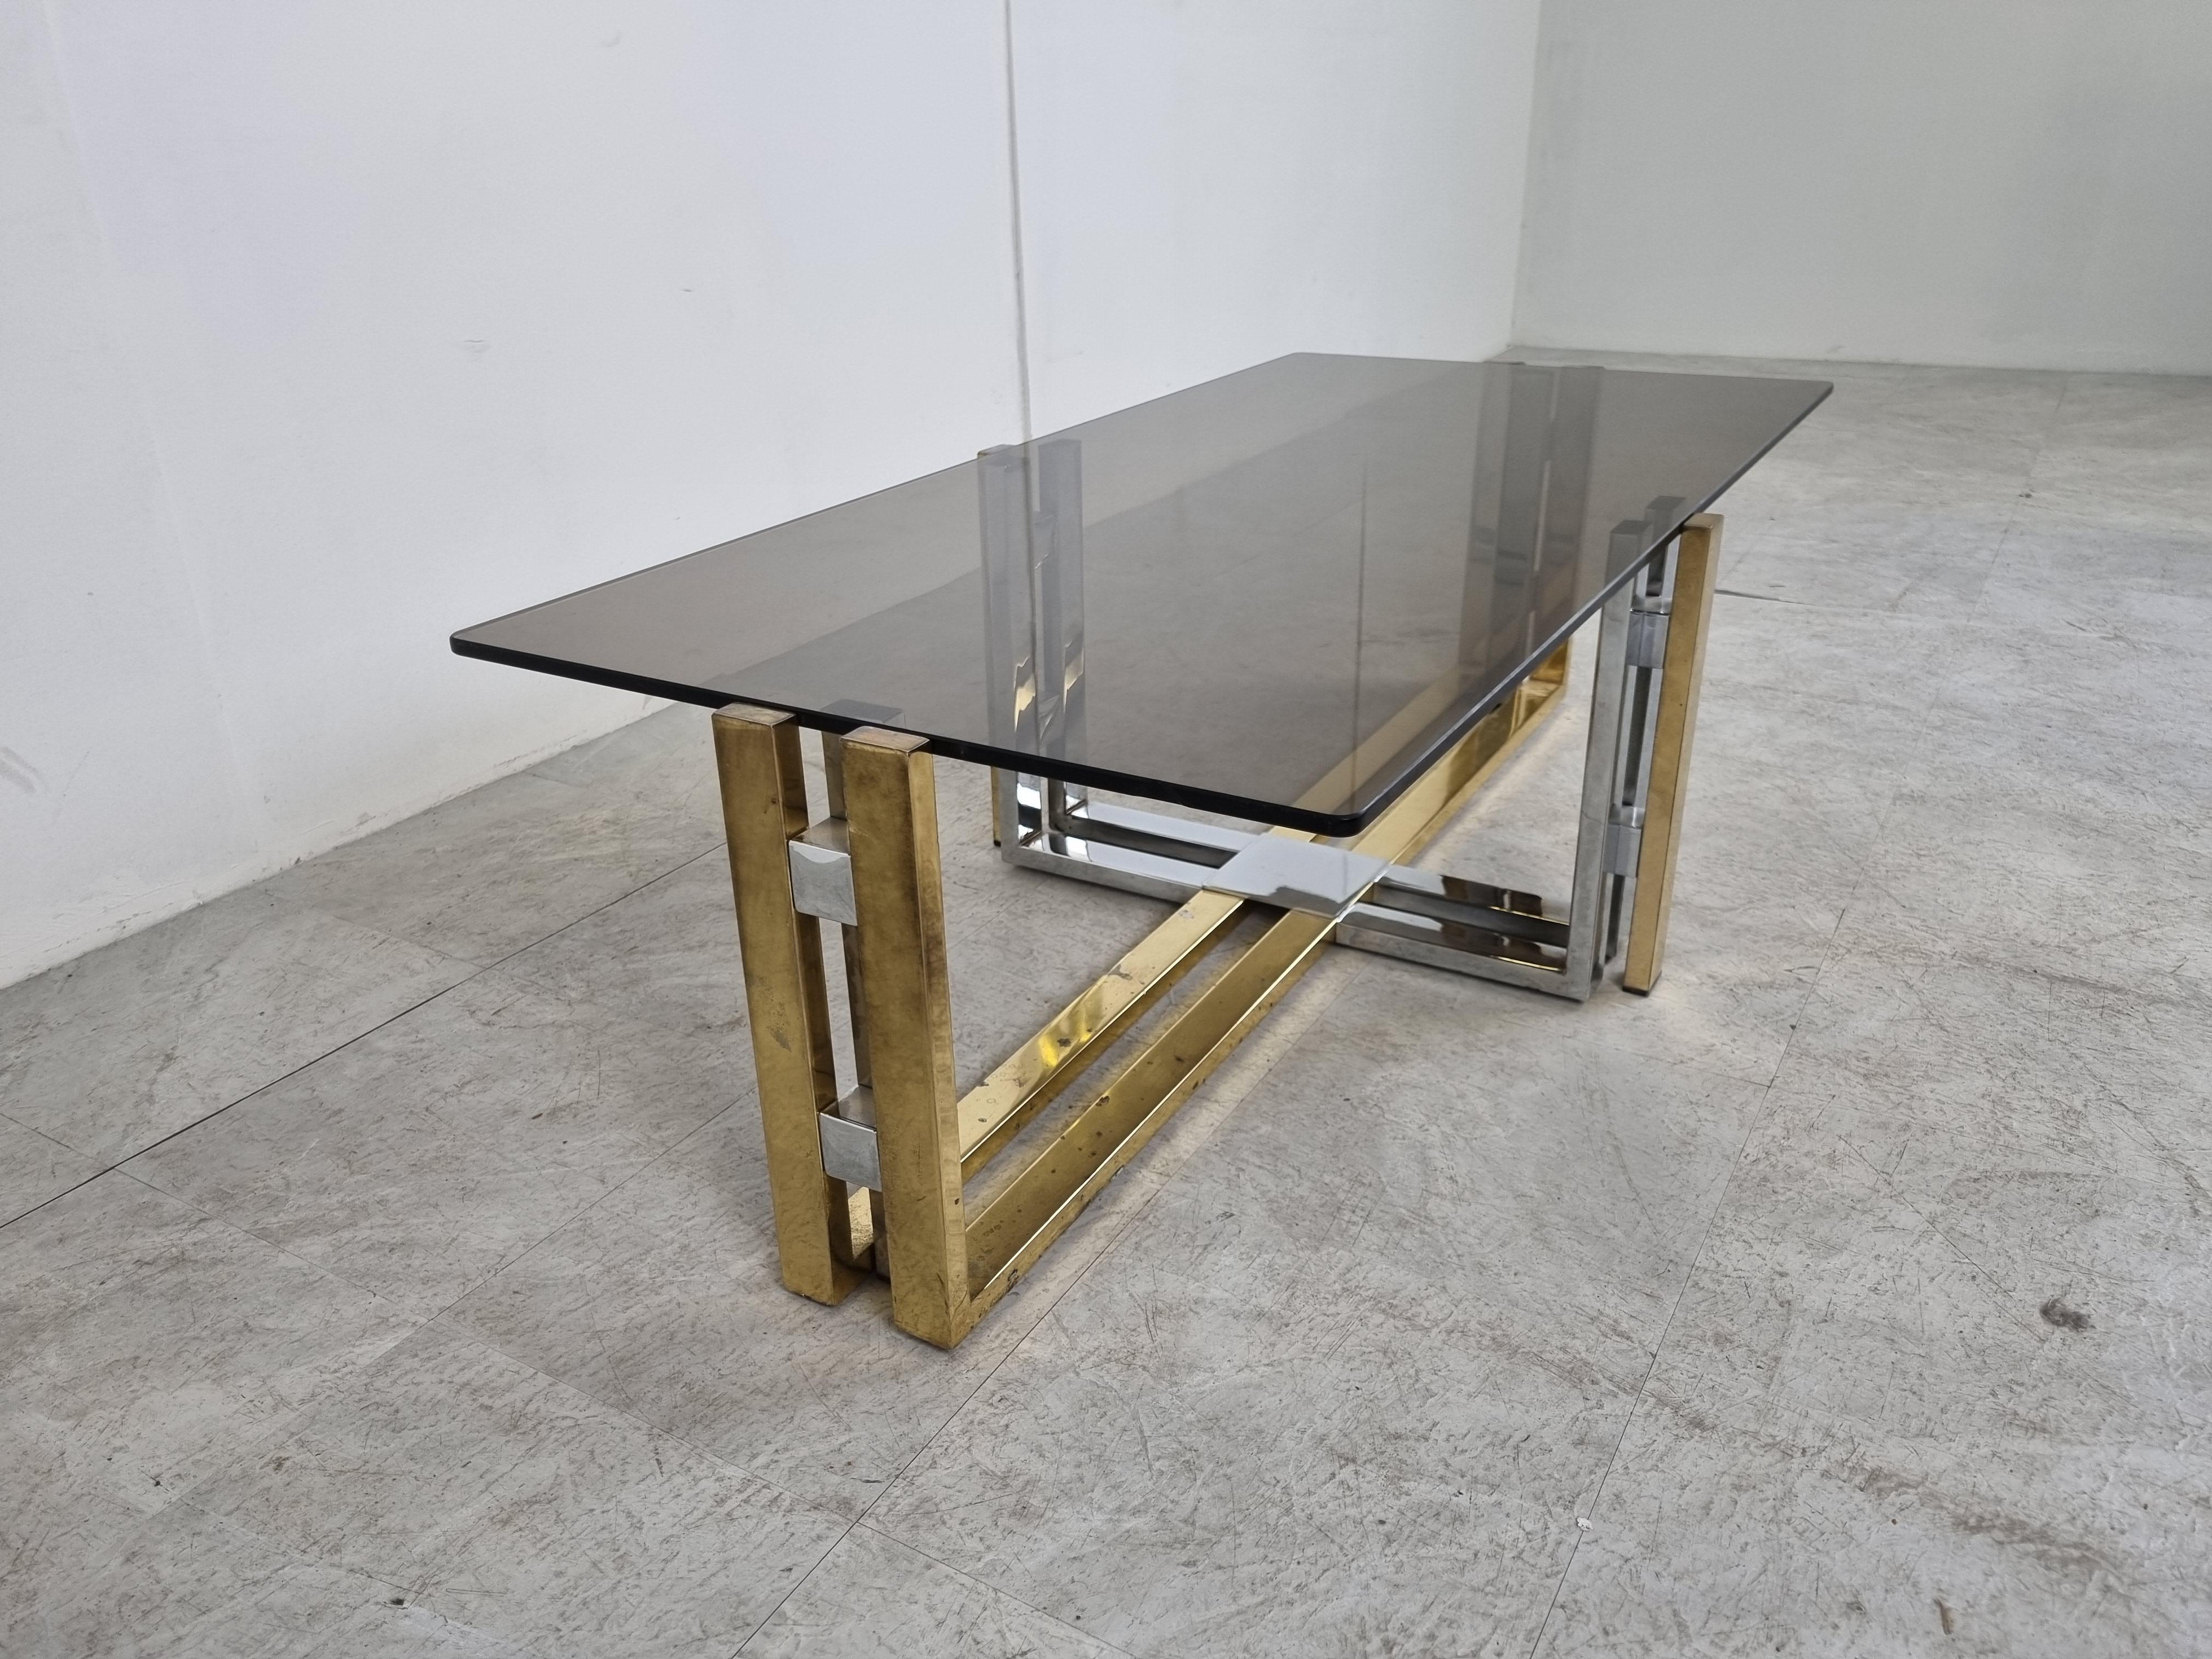 Brass and chrome coffee table with a smoked glass top in the style of Willy Rizzo or Romeo Rega

Hollywood regency style.

Condition: Patina on the brass/chrome, original glass top with minor scratches

1970s - Belgium

Dimensions:
Height: